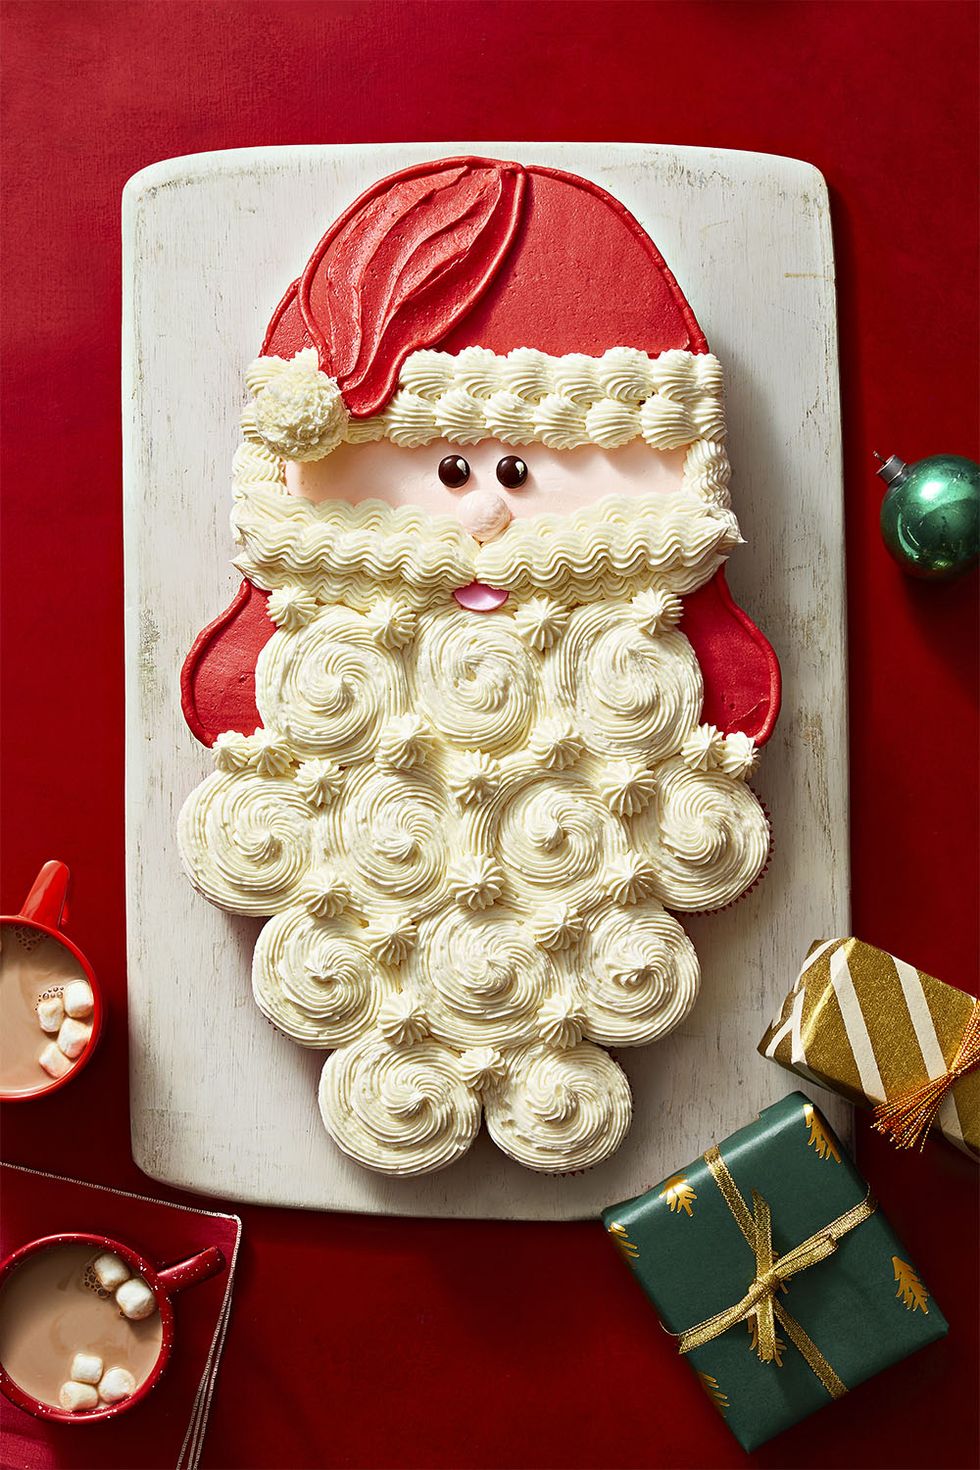 https://hips.hearstapps.com/hmg-prod/images/mr-claus-pull-apart-cupcakes-1635191273.jpg?crop=1xw:1xh;center,top&resize=980:*